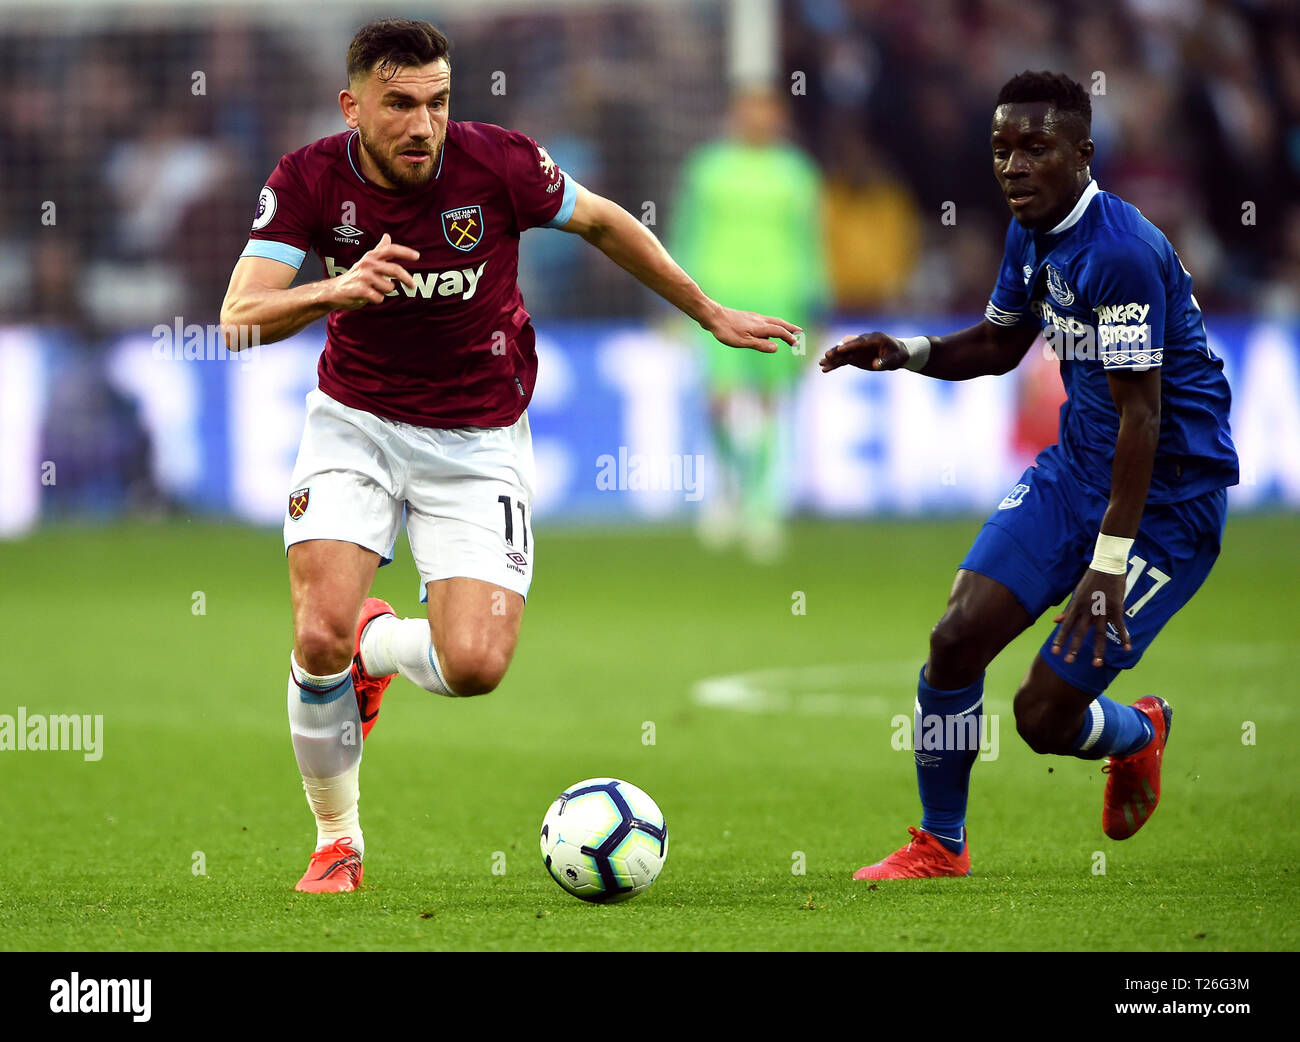 West Ham United's Robert Snodgrass (left) and Everton's Idrissa Gueye battle for the ball during the Premier League match at London Stadium. Stock Photo